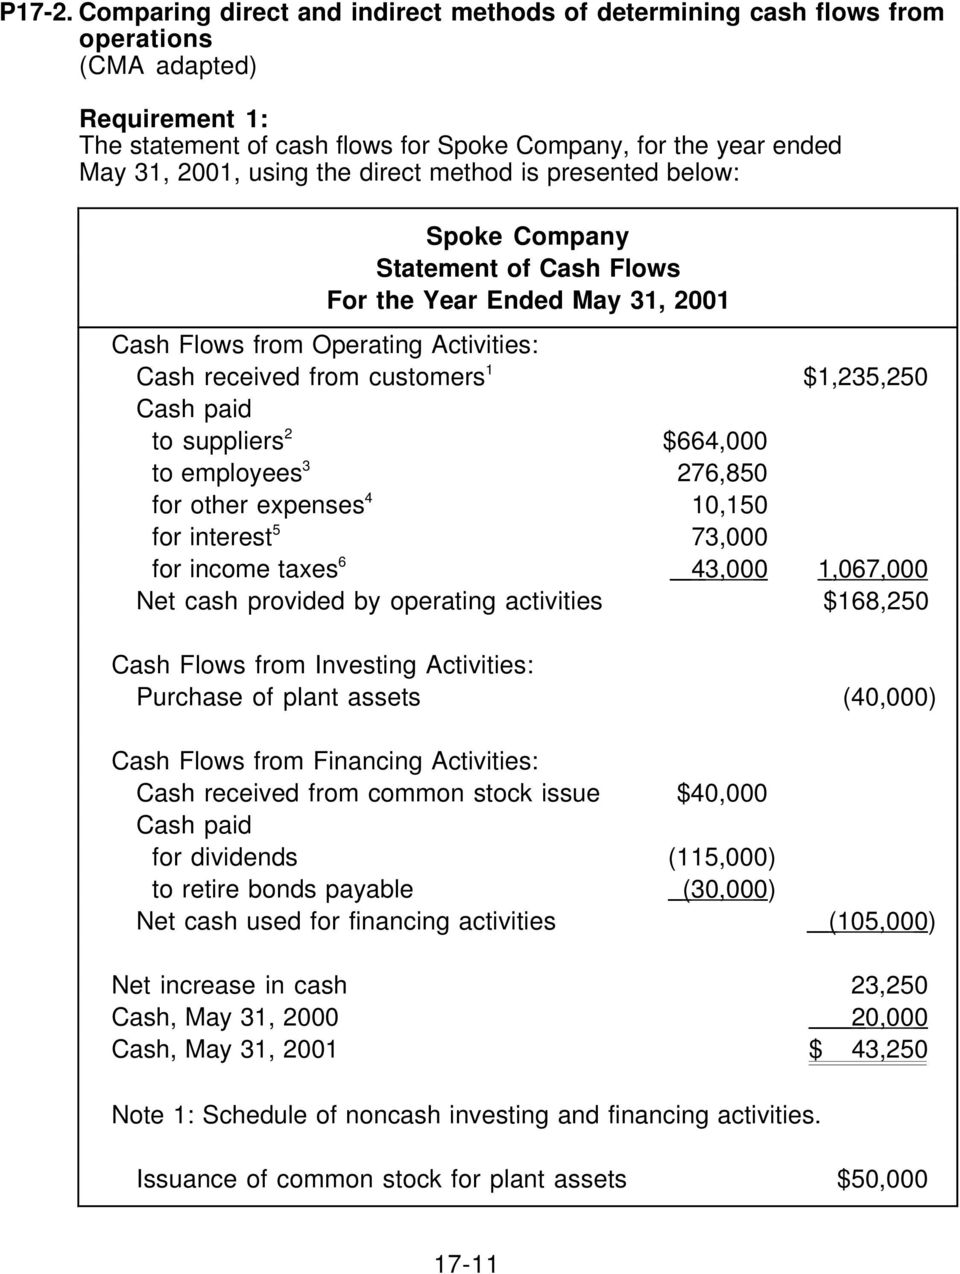 direct method is presented below: Spoke Company Statement of Cash Flows For the Year Ended May 31, 2001 Cash Flows from Operating Activities: Cash received from customers 1 $1,235,250 Cash paid to